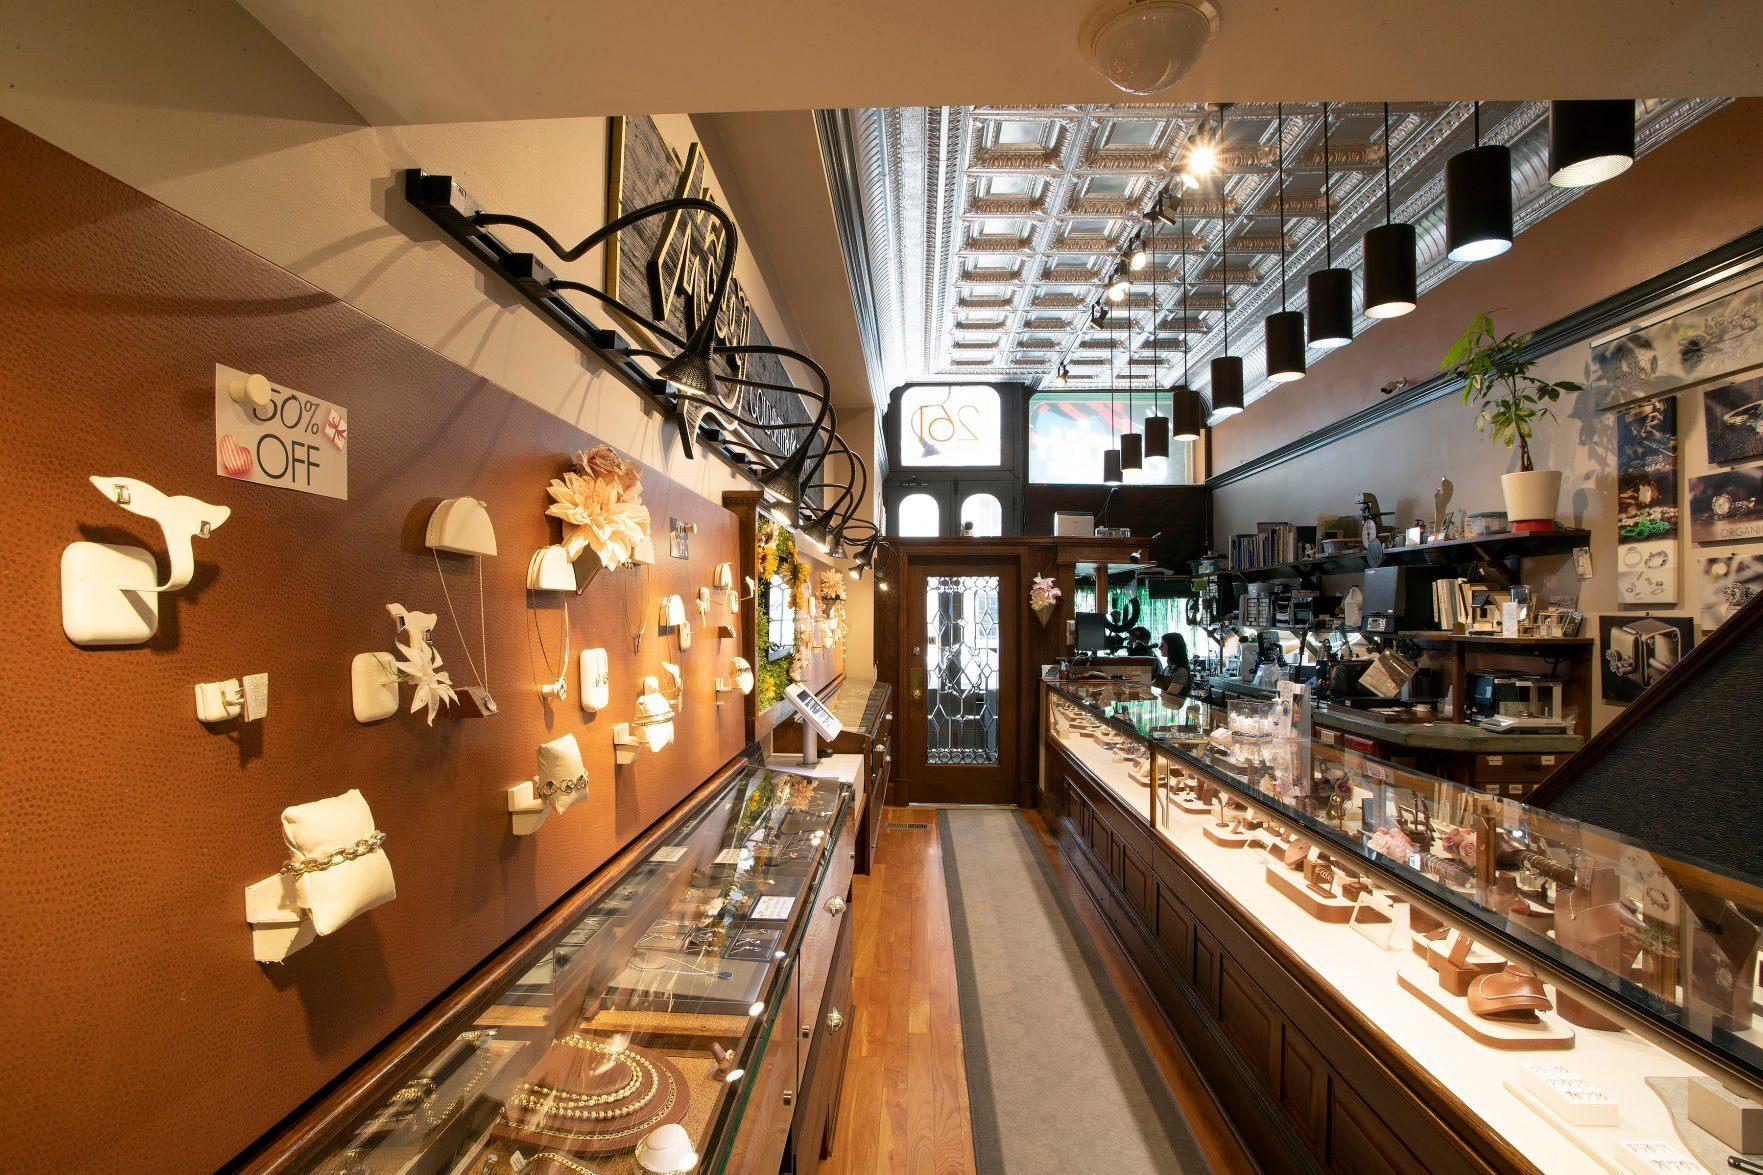 Interior of McCoy Goldsmith & Jeweler in Dubuque on Thursday, May 5, 2022.    PHOTO CREDIT: Stephen Gassman